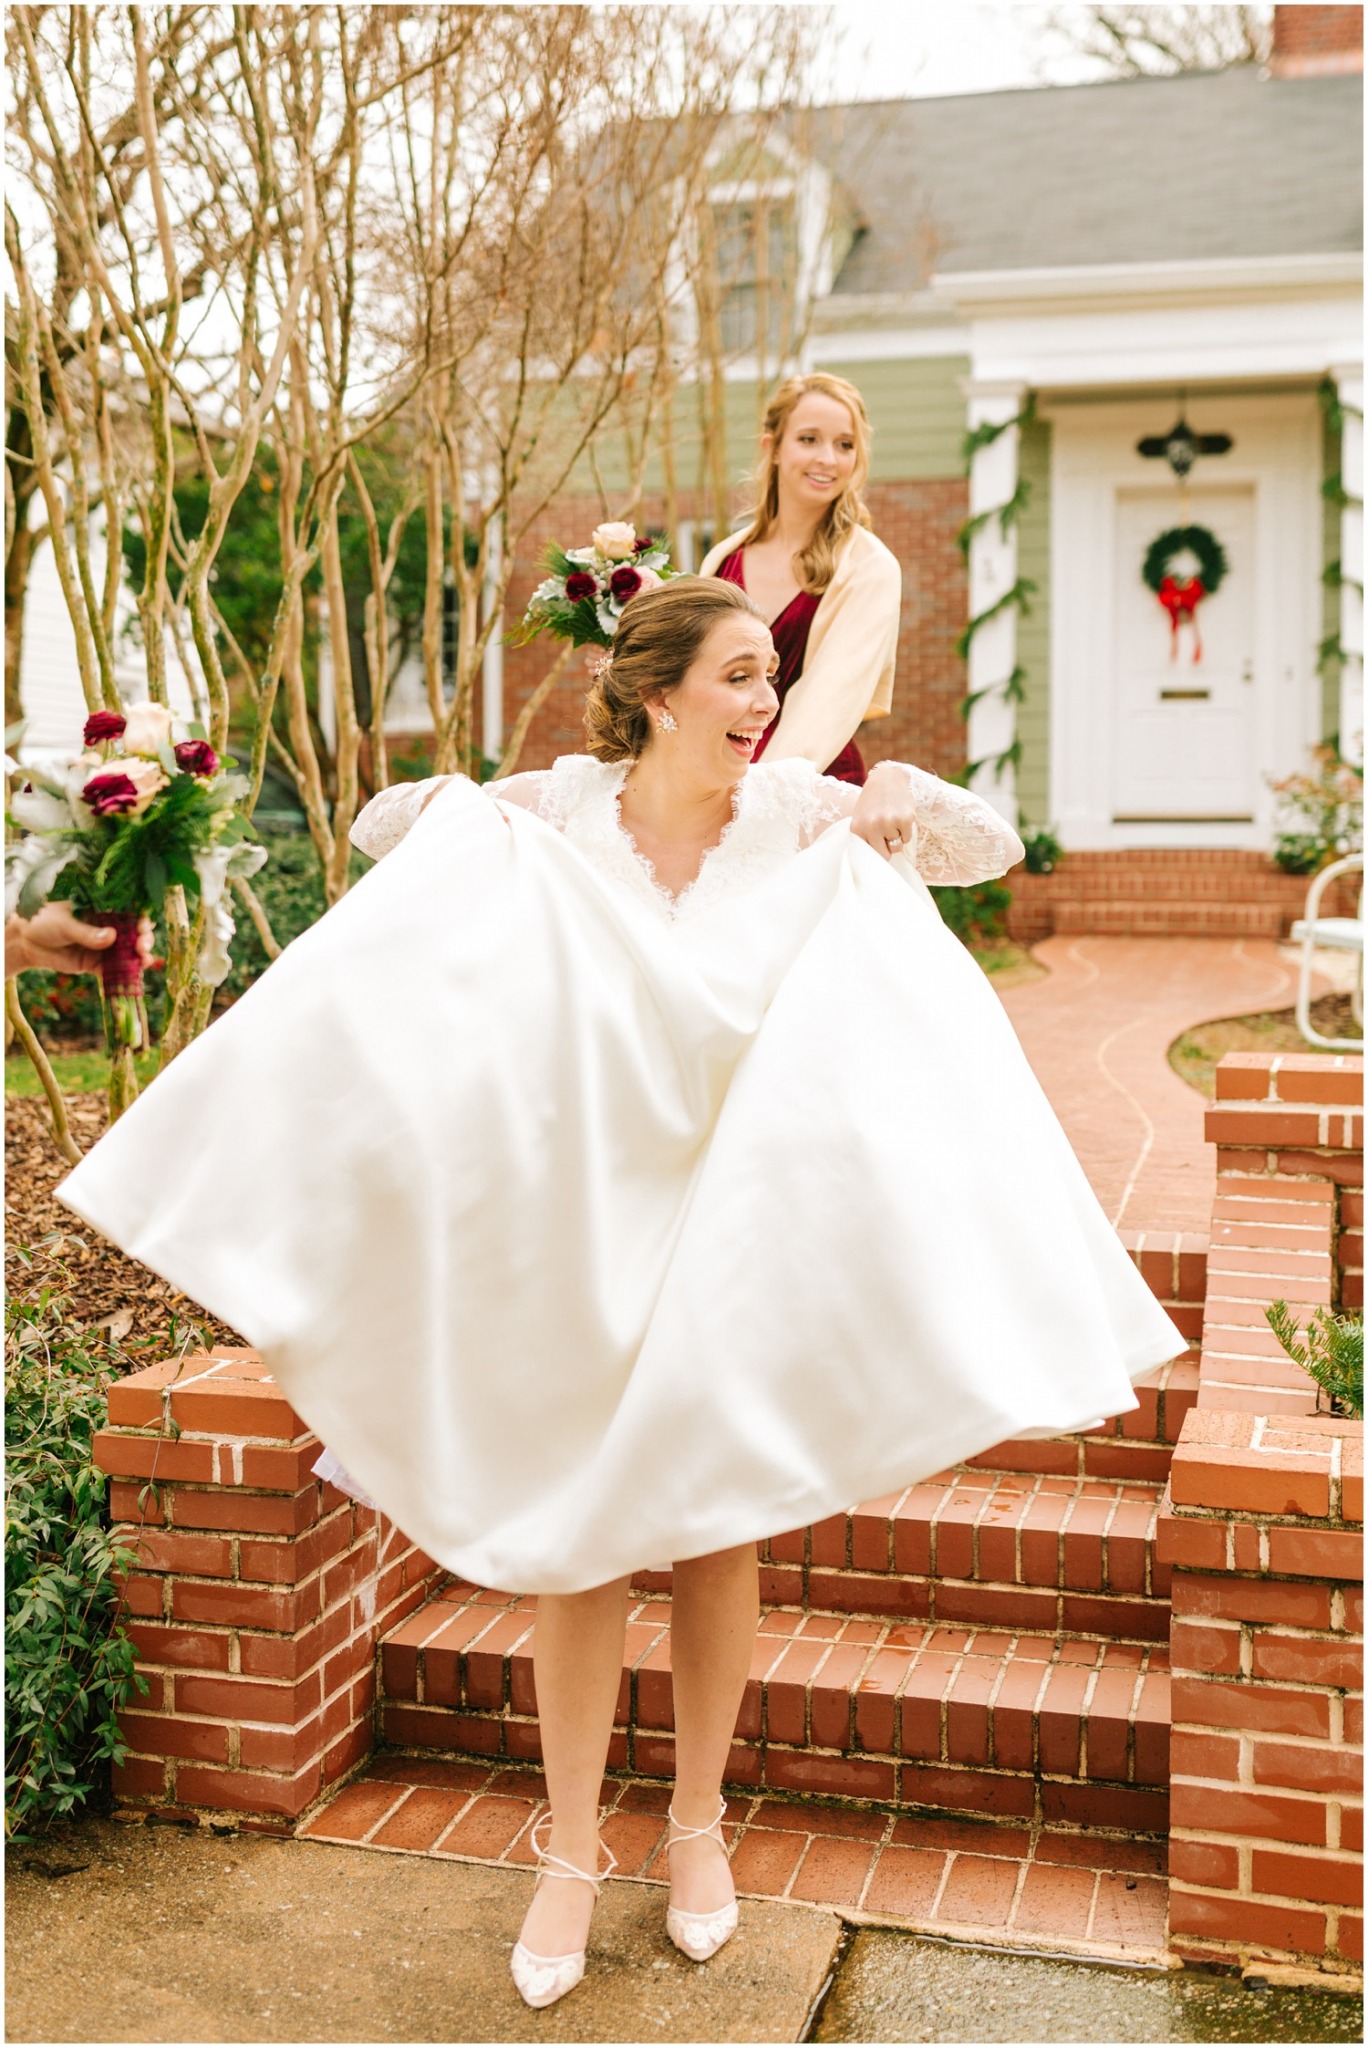 bride shoes off shoes by lifting dress while bridesmaid helps her